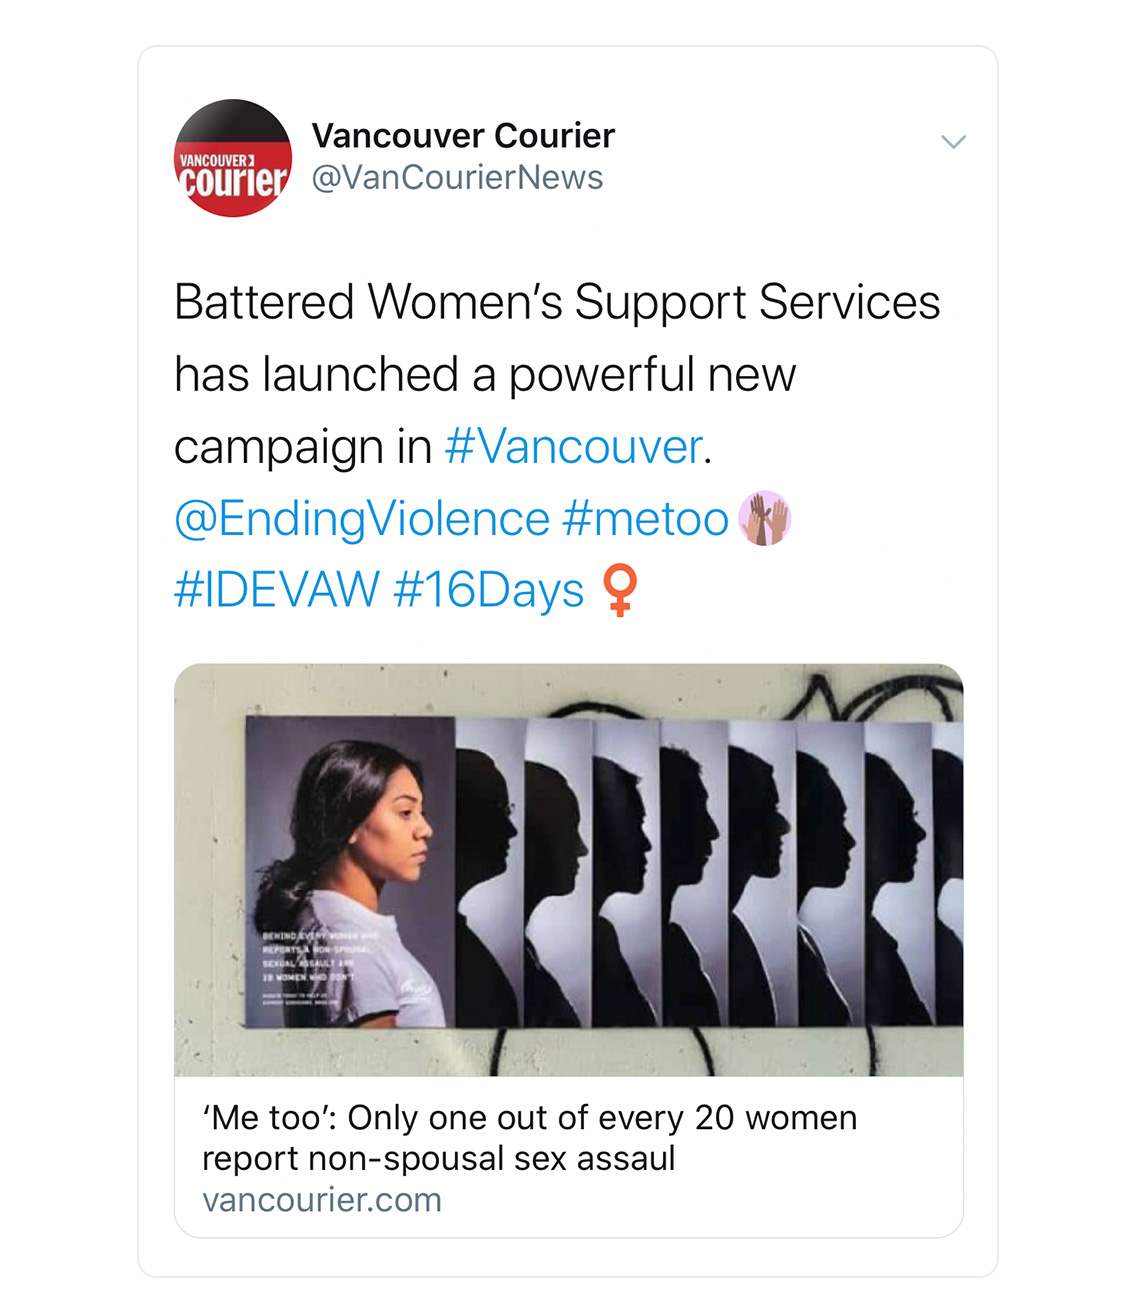 Vancouver Courier tweet in support of BWSS 1 in 20 campaign